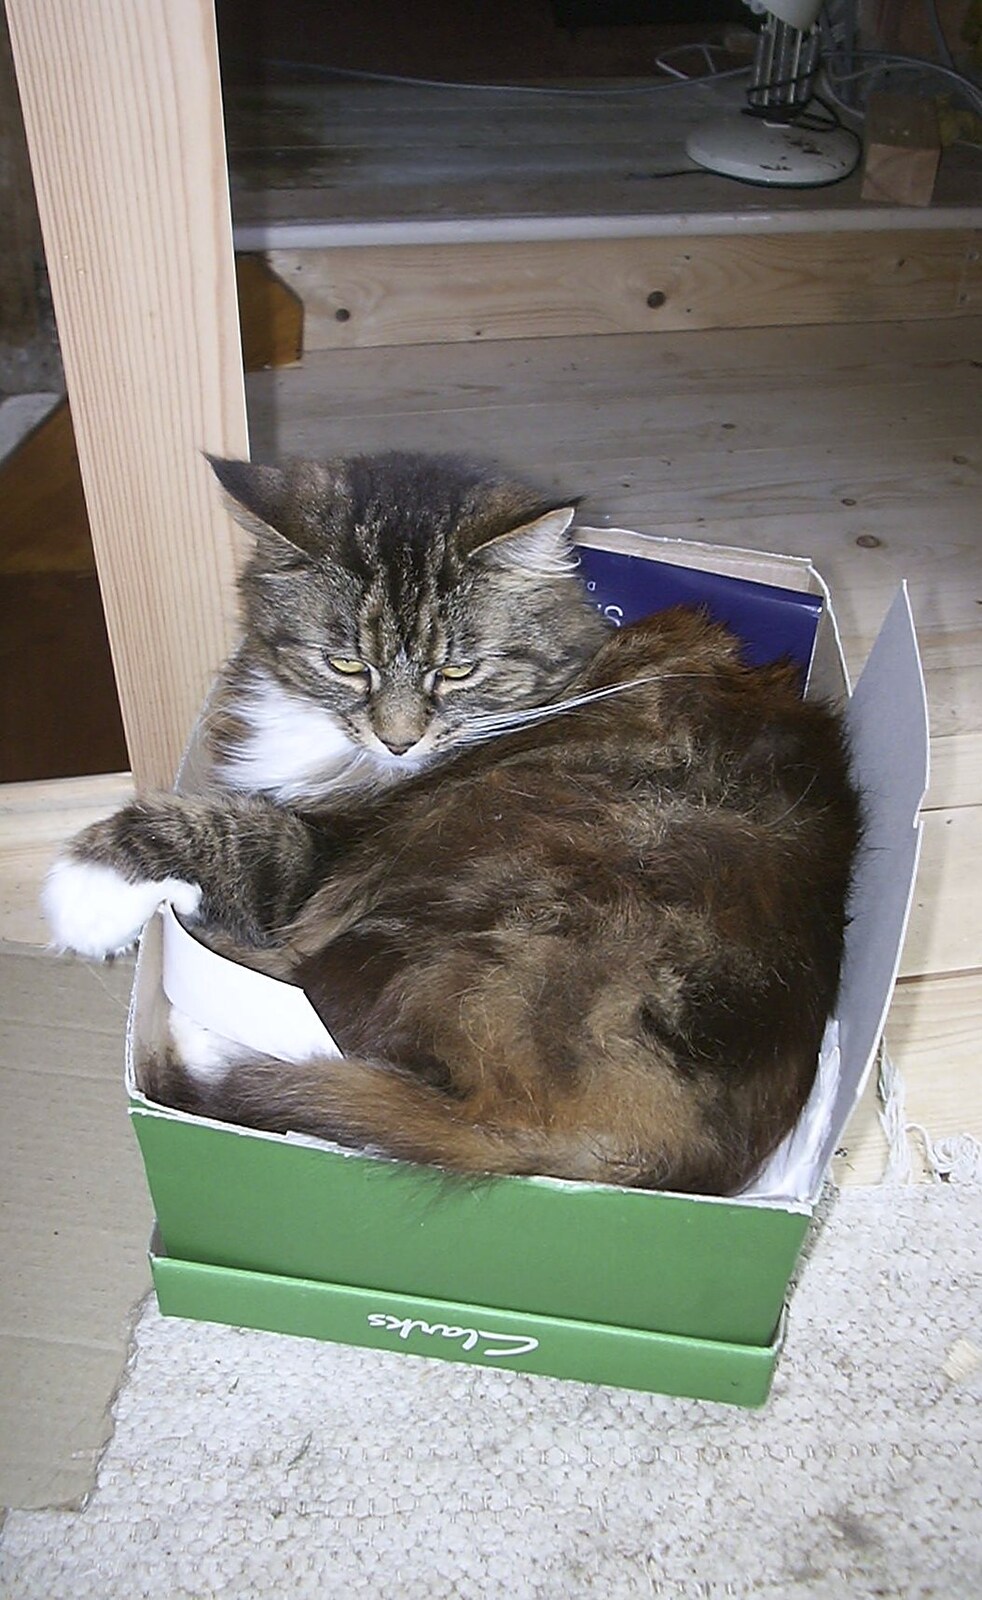 Sophie's in a shoebox from June Randomness, Brome, Suffolk - 15th June 2001